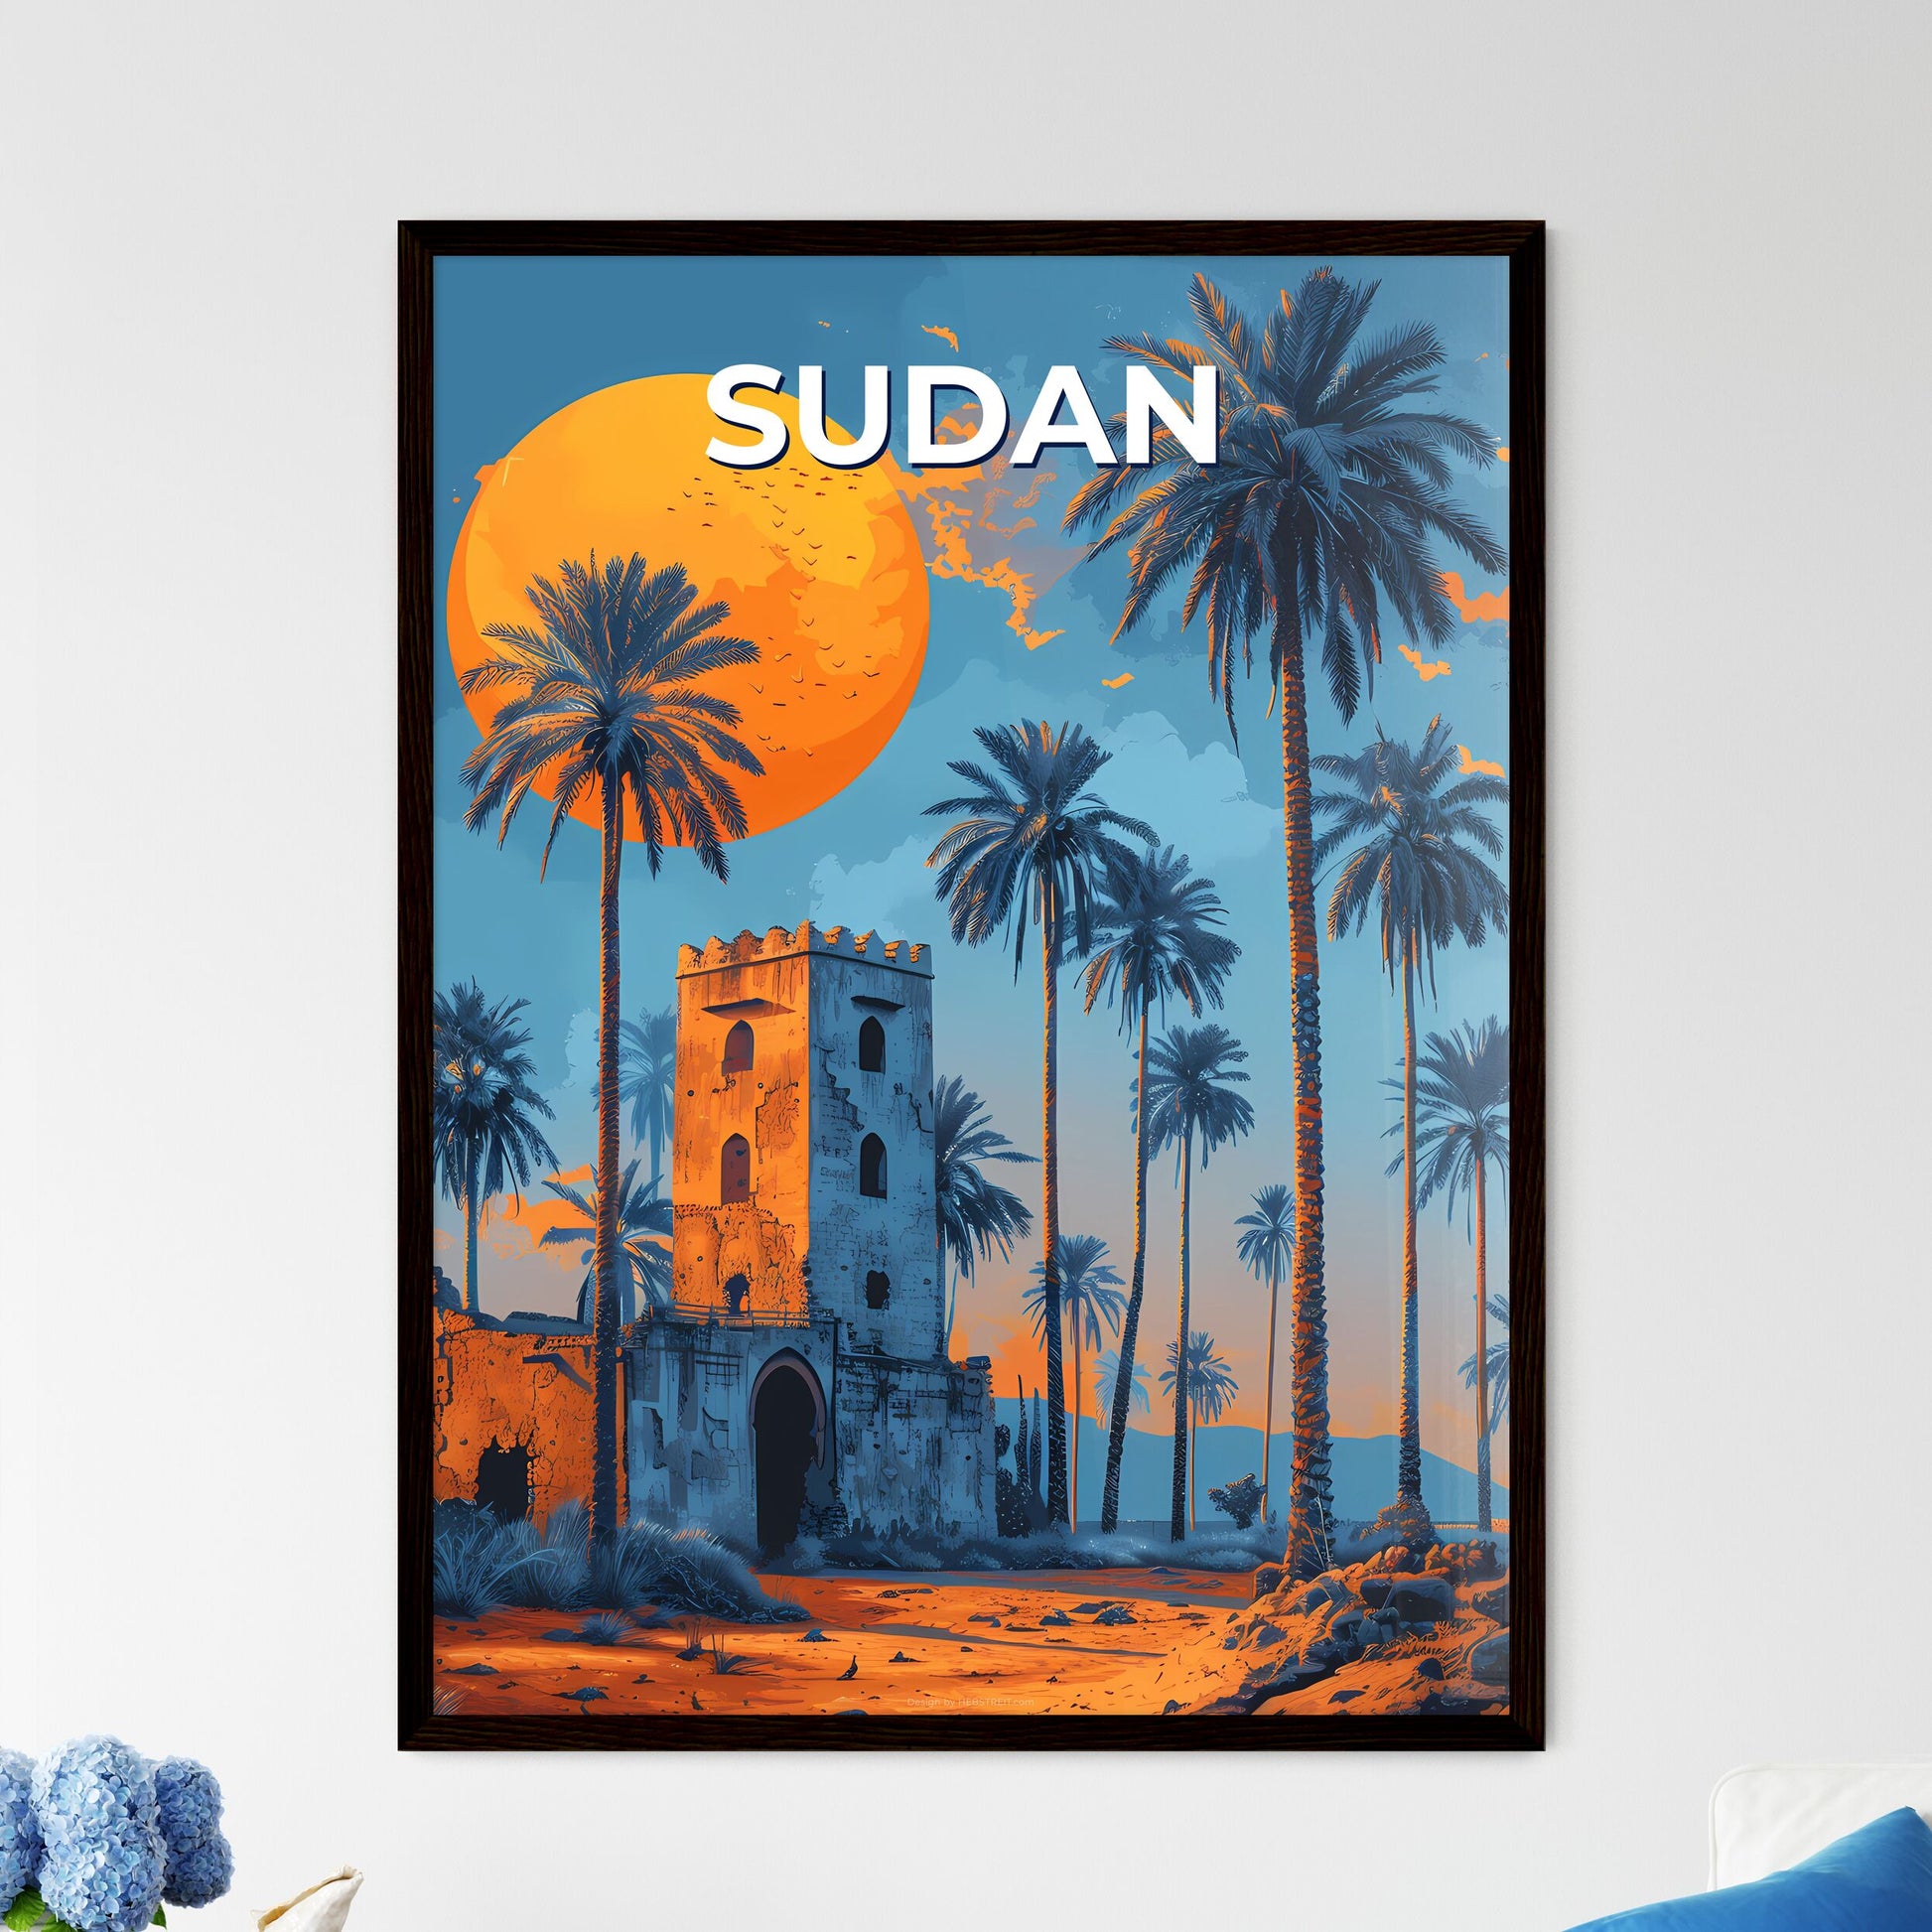 Sudan, Africa - Palm Tree and Tower Painting, Vibrant Art, African Culture, Travel, Souvenirs